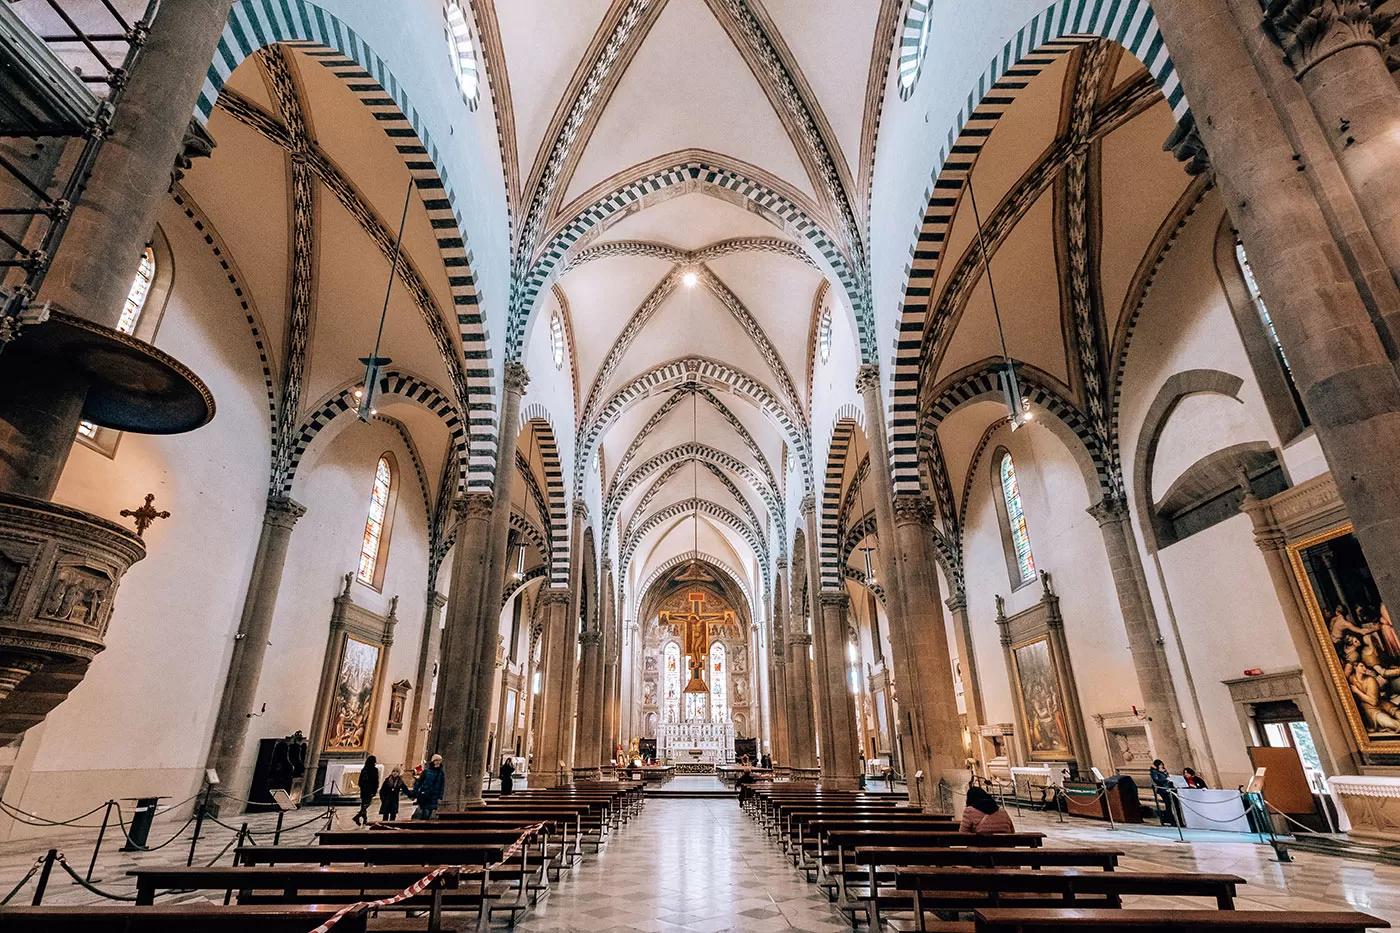 Unique Things to Do in Florence - Basilica of Santa Maria Novella - Inside